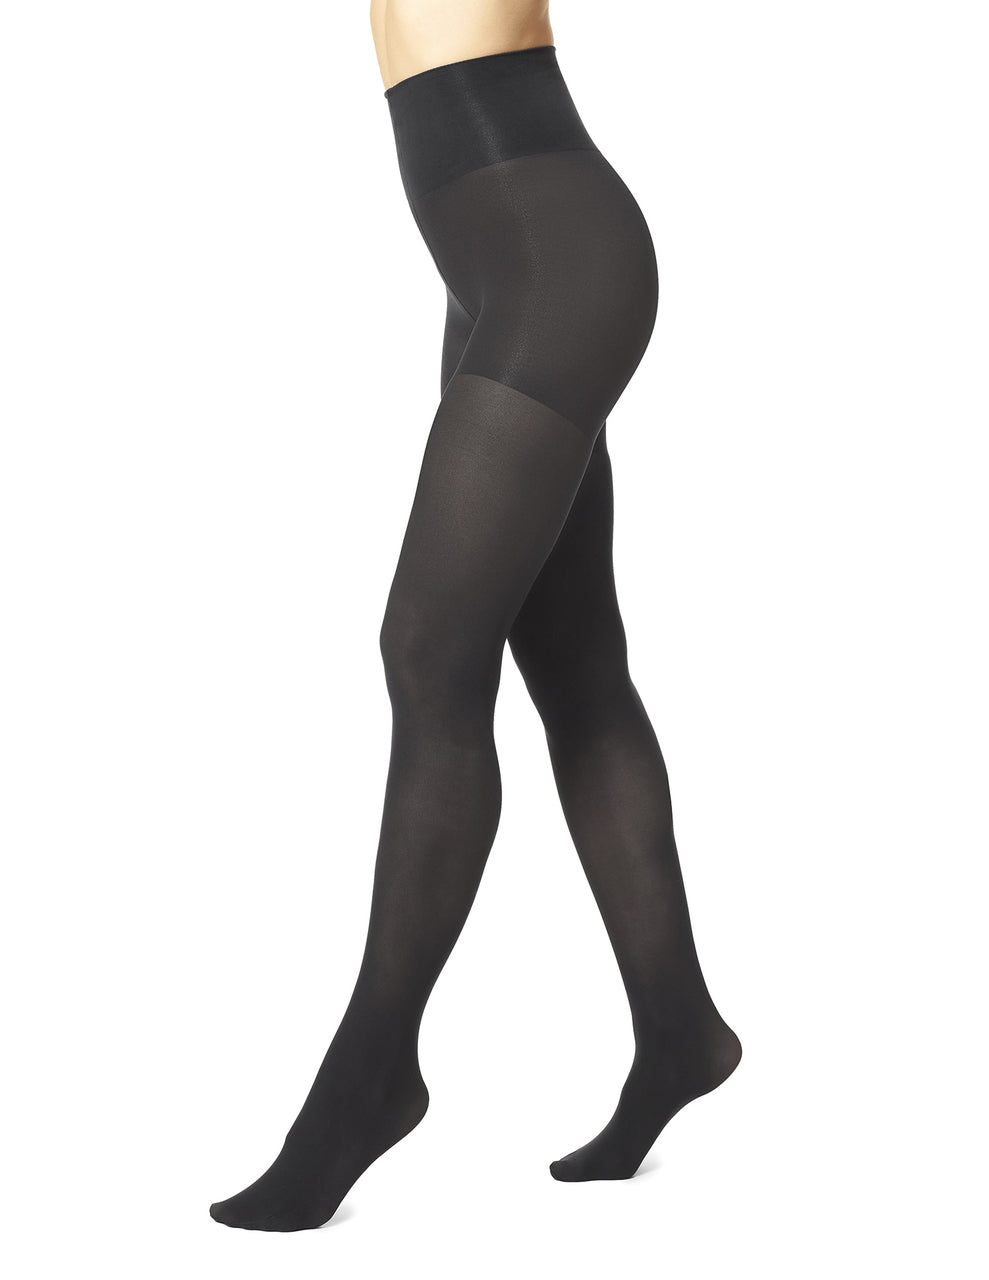 High Waist Tights With Control Top